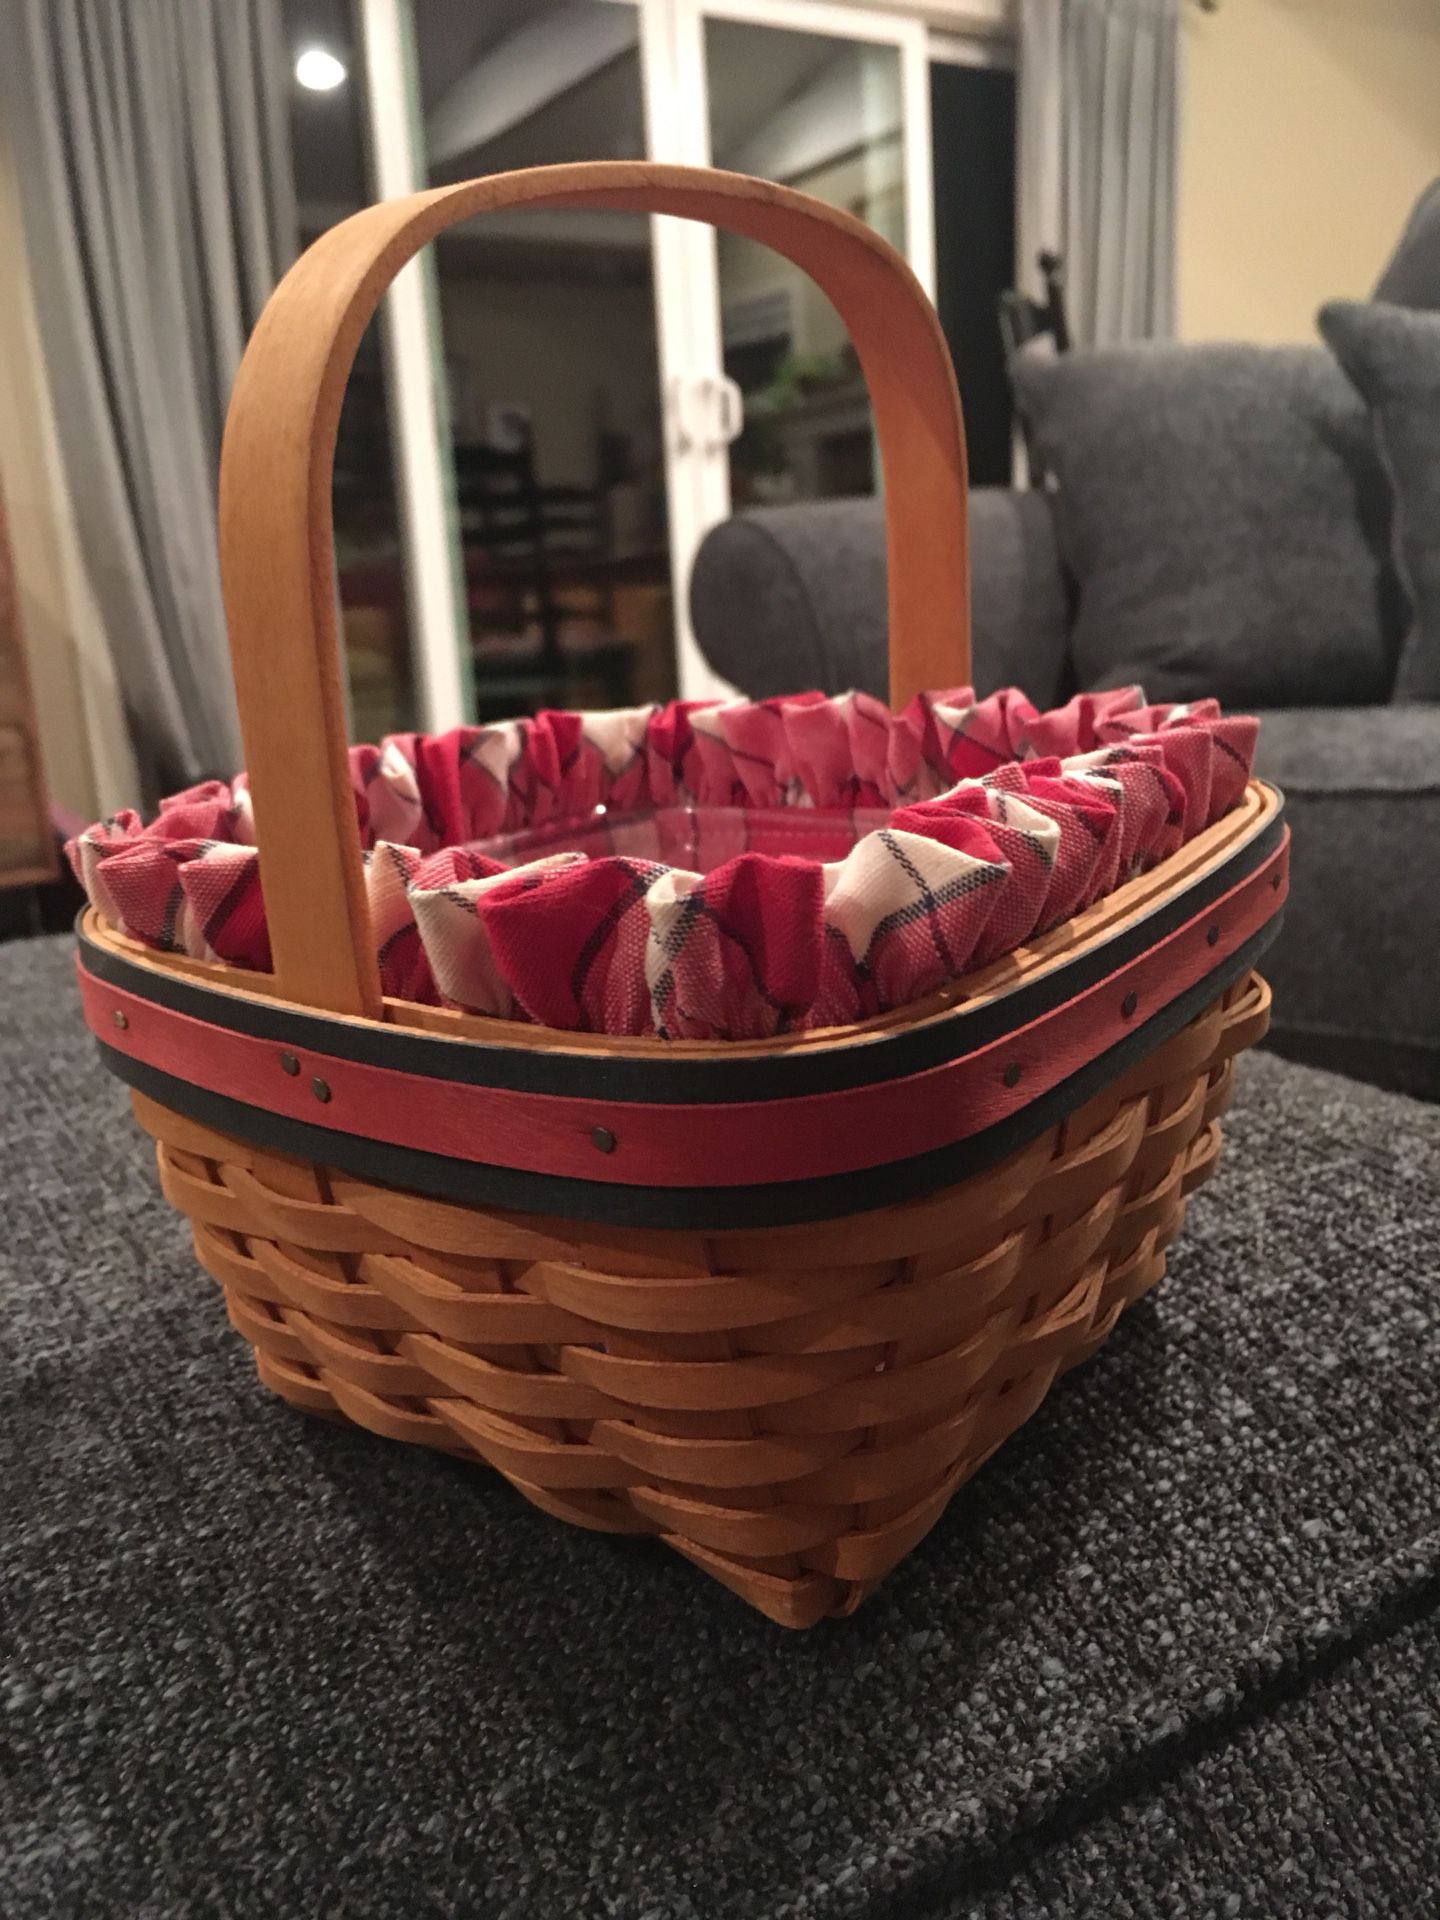 5 x 5 inch longaberger Basket with liner and protector